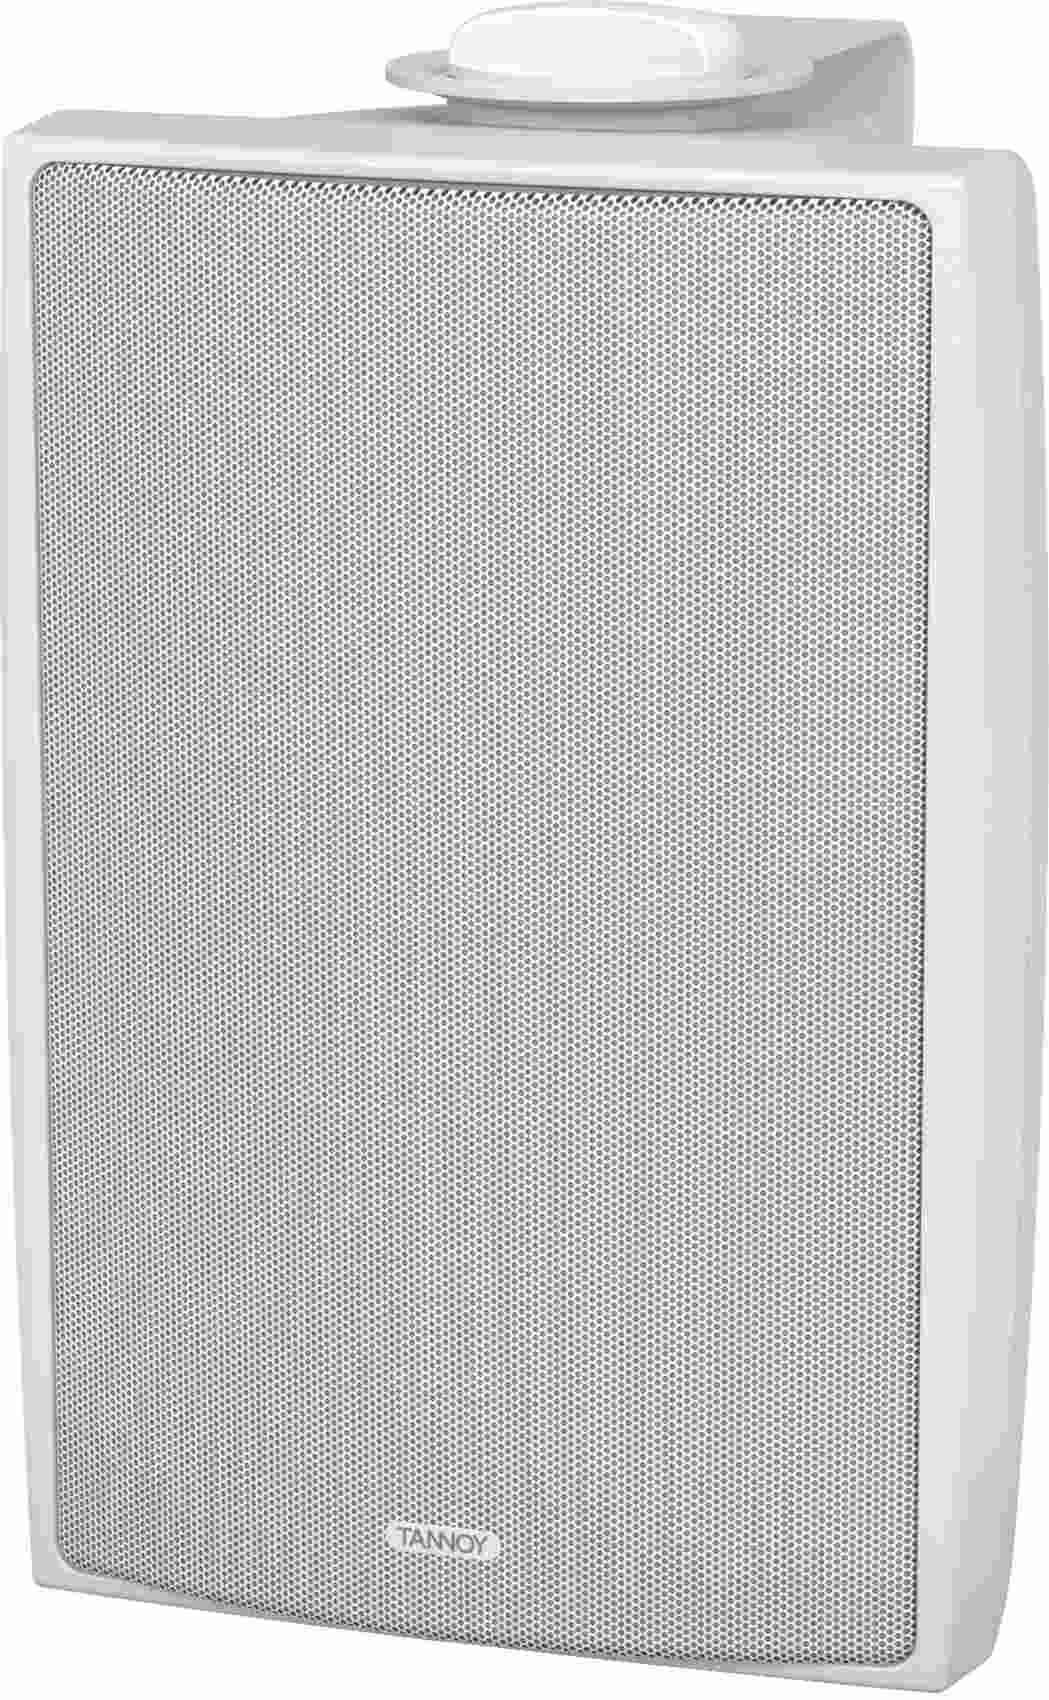 Tannoy DVS 4-WH - фото 5